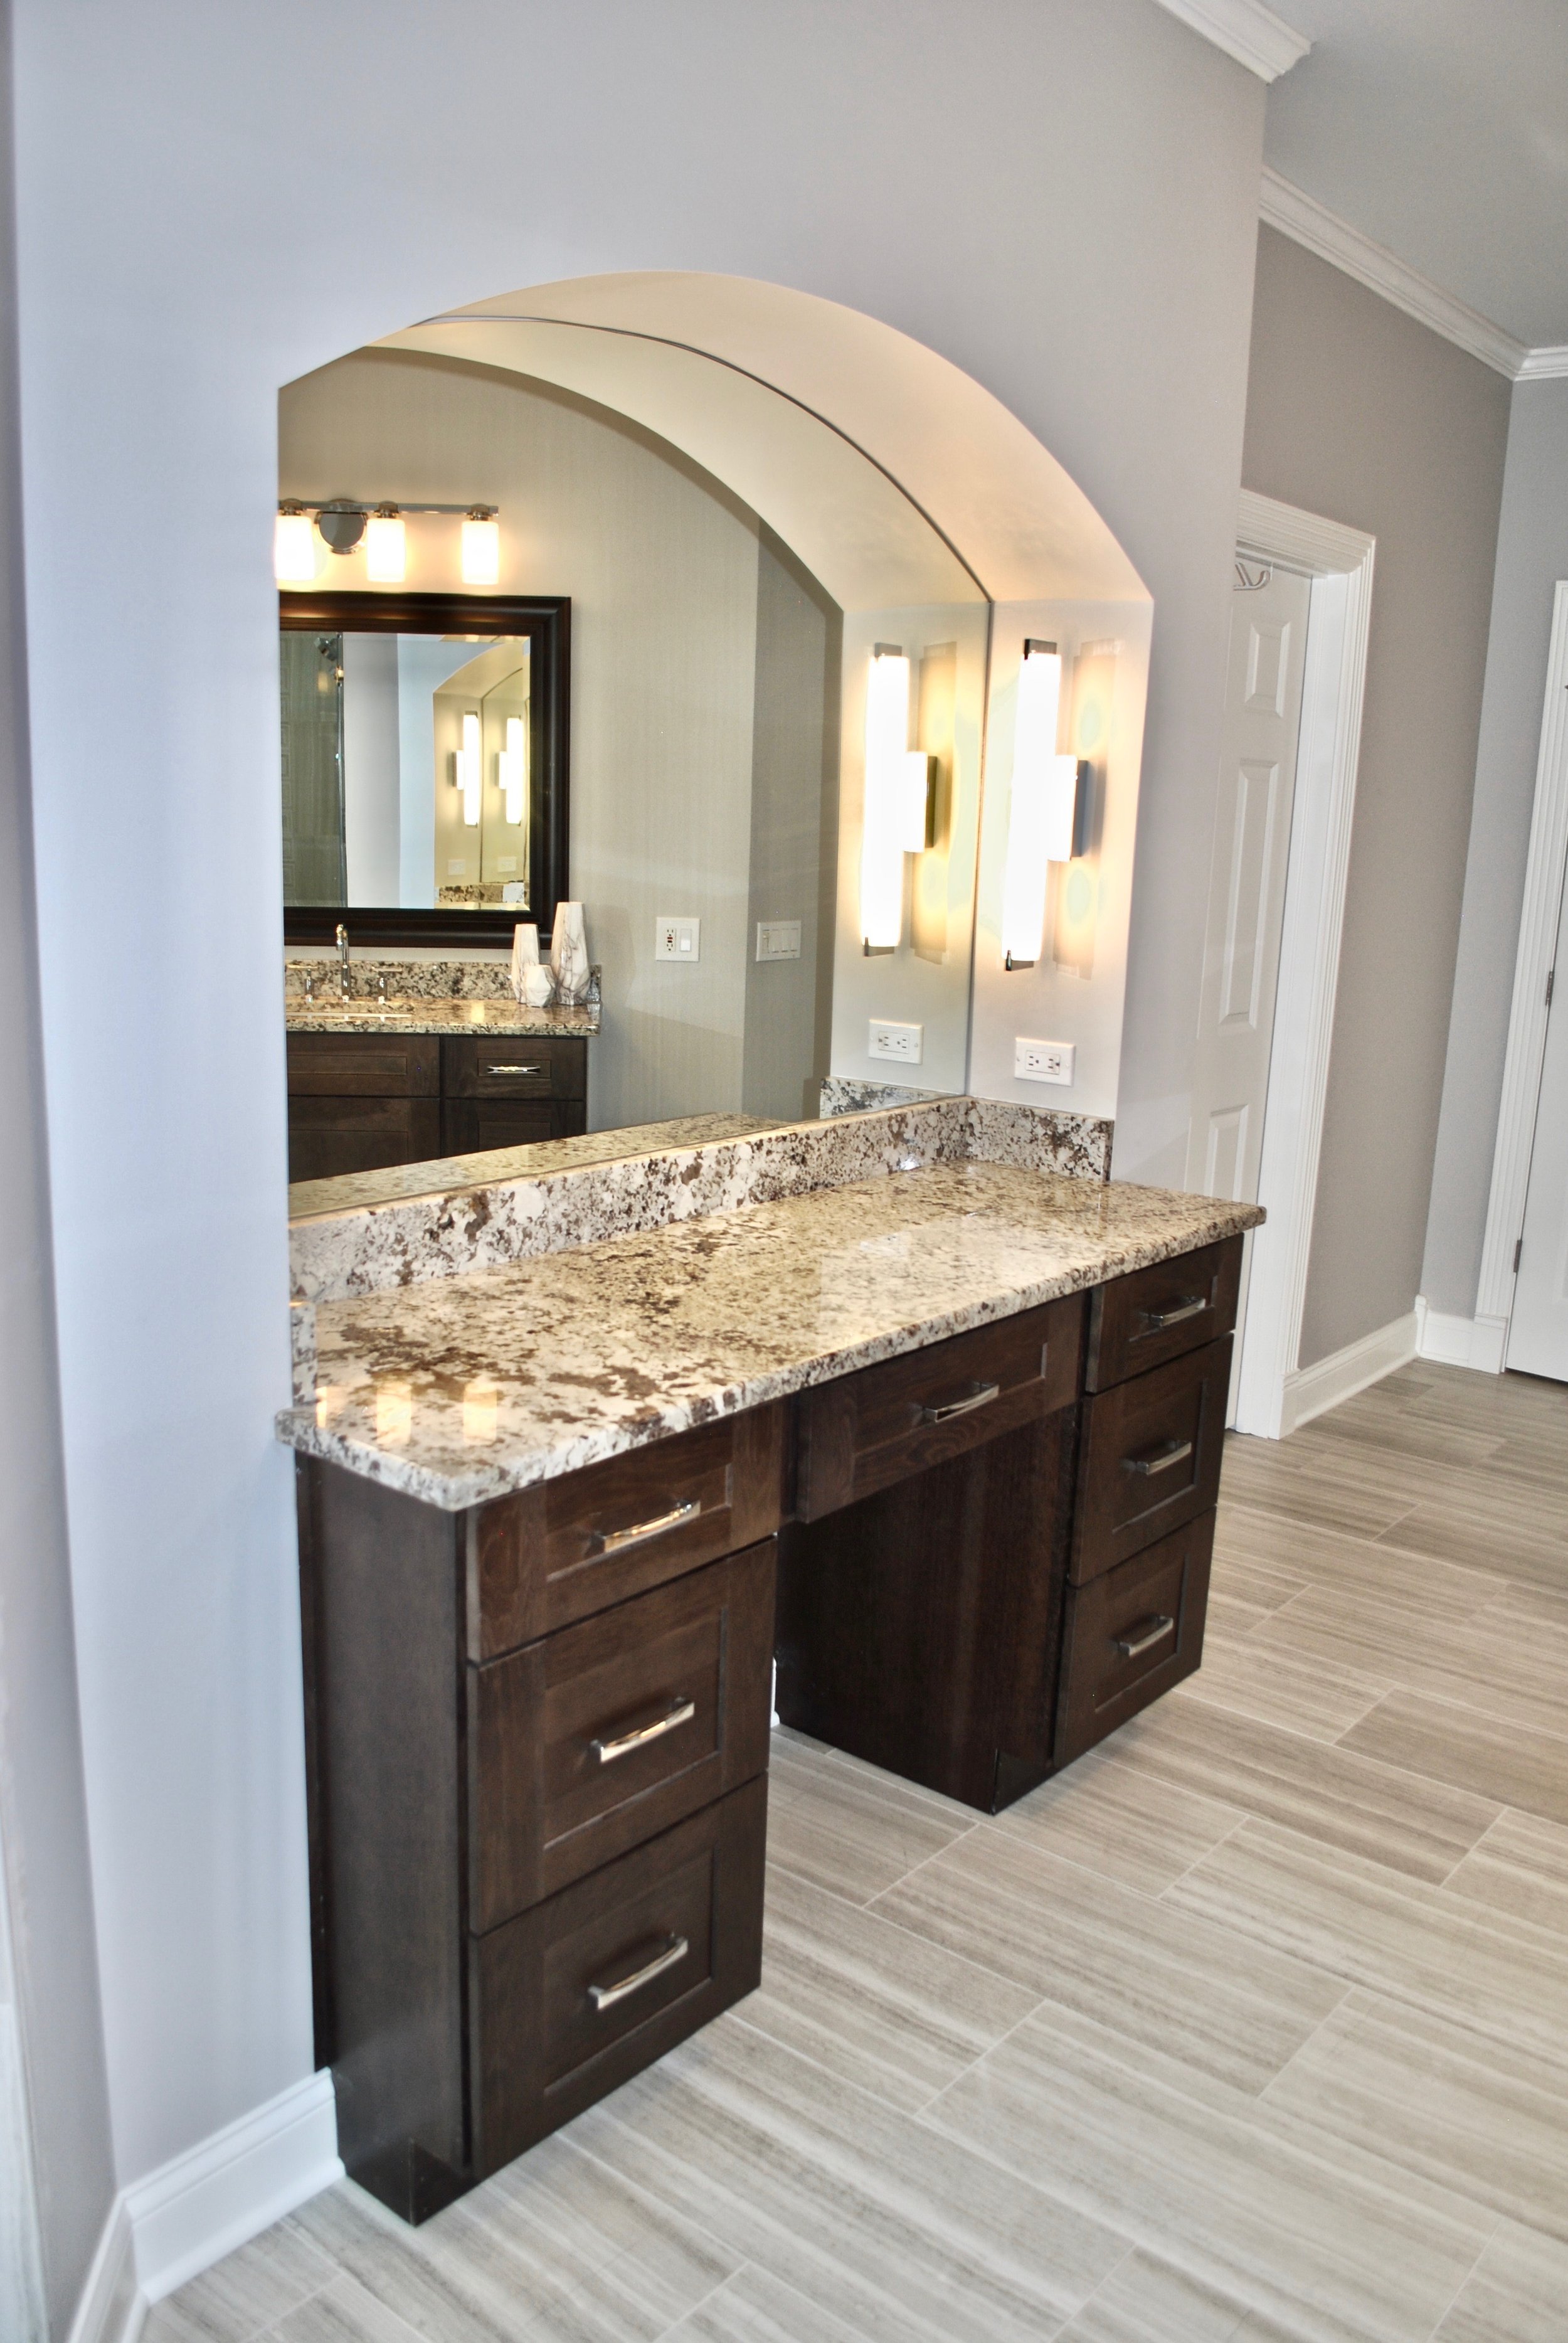 CUSTOM MAKEUP COUNTER IN THIS NAPERVILLE IL CUSTOM HOME MASTER BATHROOM REMODELING PROJECT IN NAPERVILLE IL